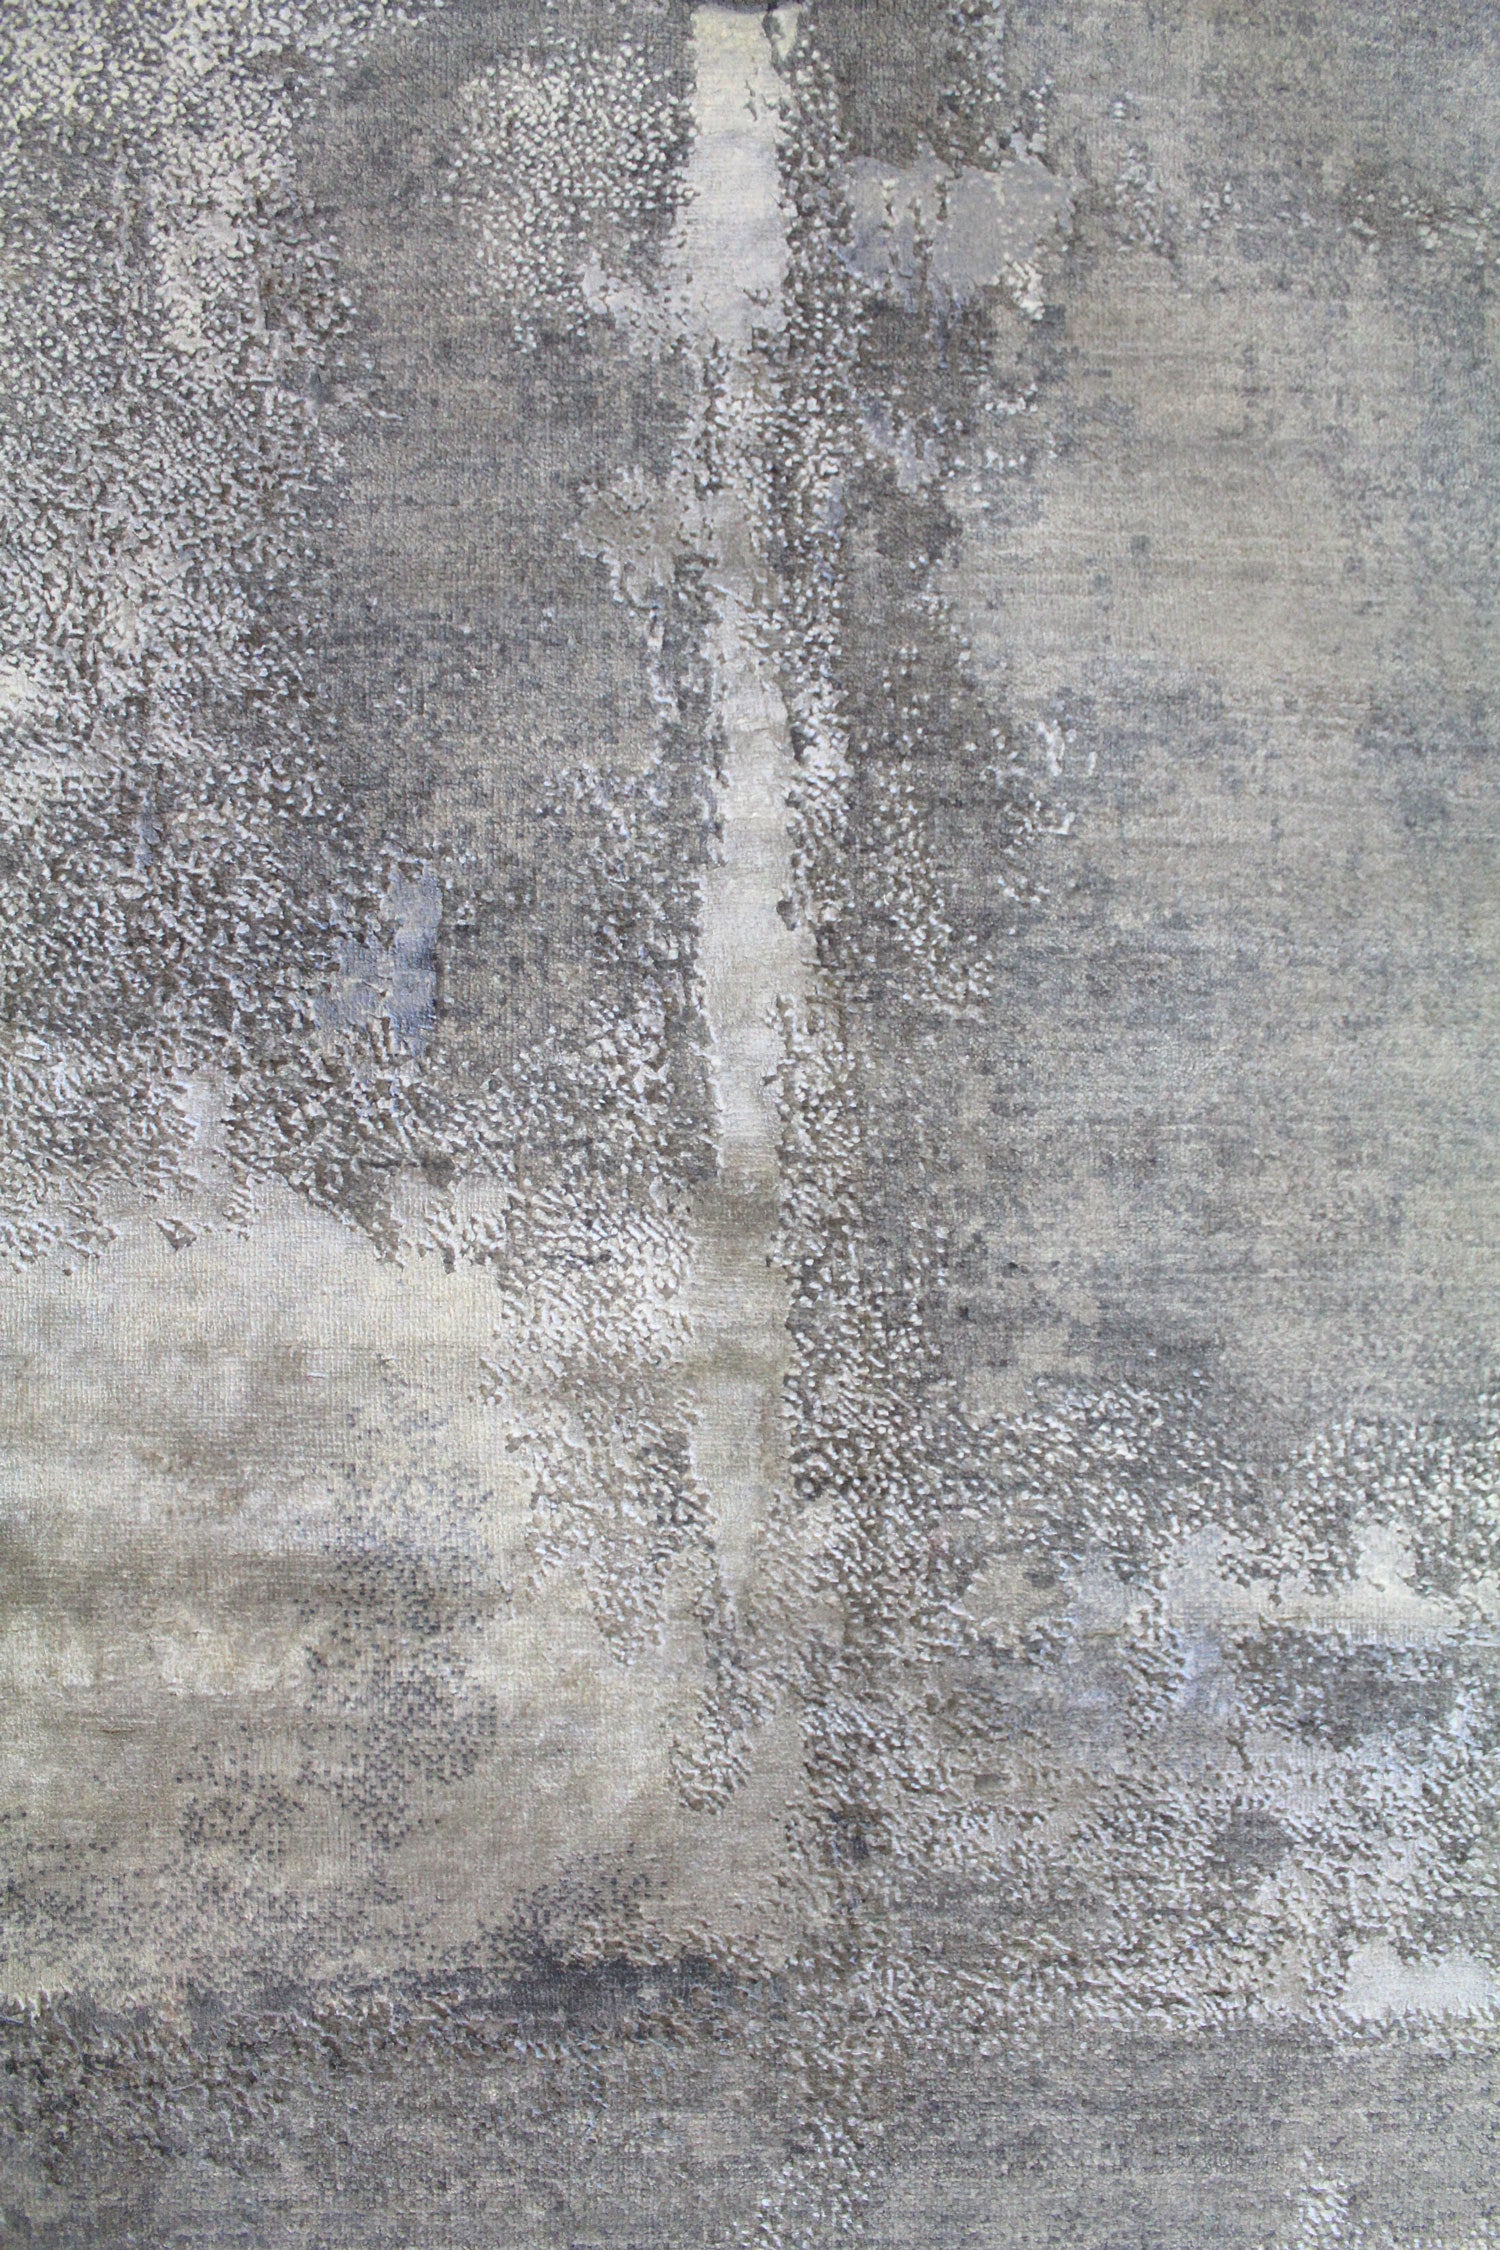 Weathered Handwoven Contemporary Rug, J59397